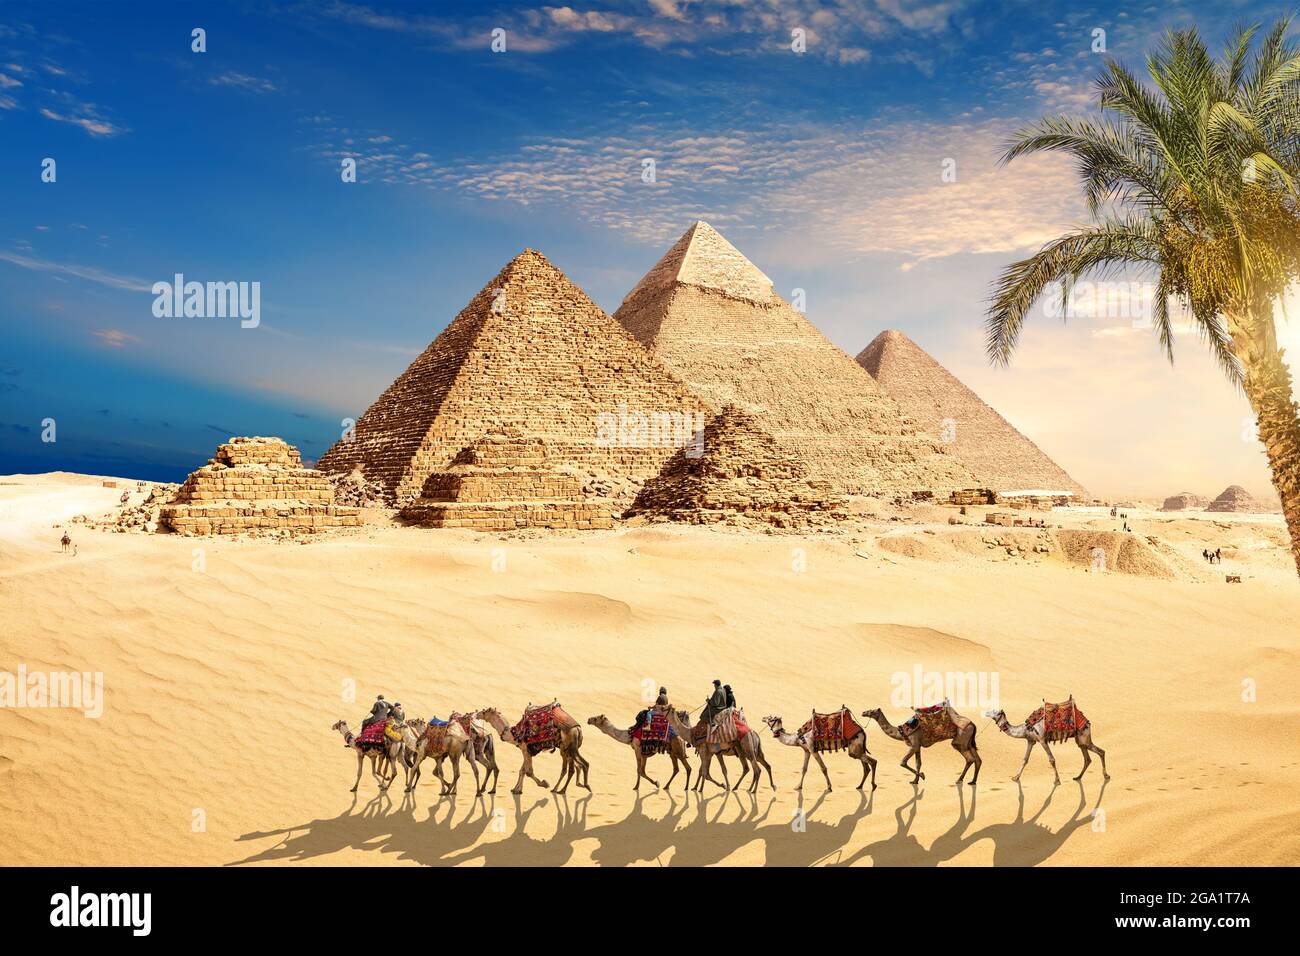 Camels in the sands by the Great Pyramids of Giza, Cairo, Egypt Stock Photo